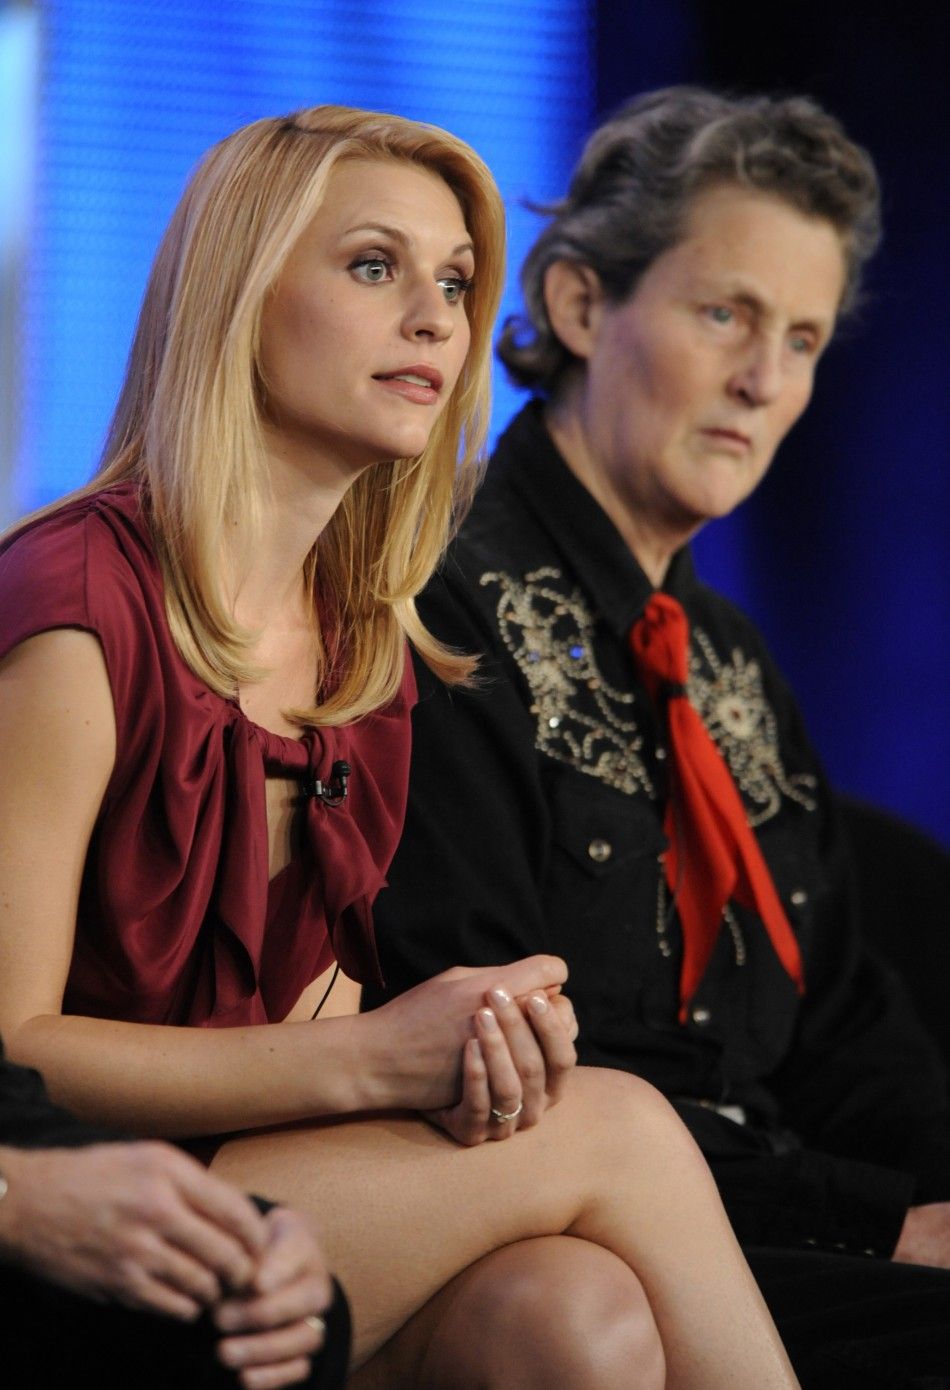 Actress Claire Danes and Dr. Temple Grandin participate in a panel for HBOs quotTemple Grandinquot during the HBO sessions of the Television Critics Association winter press tour in Pasadena